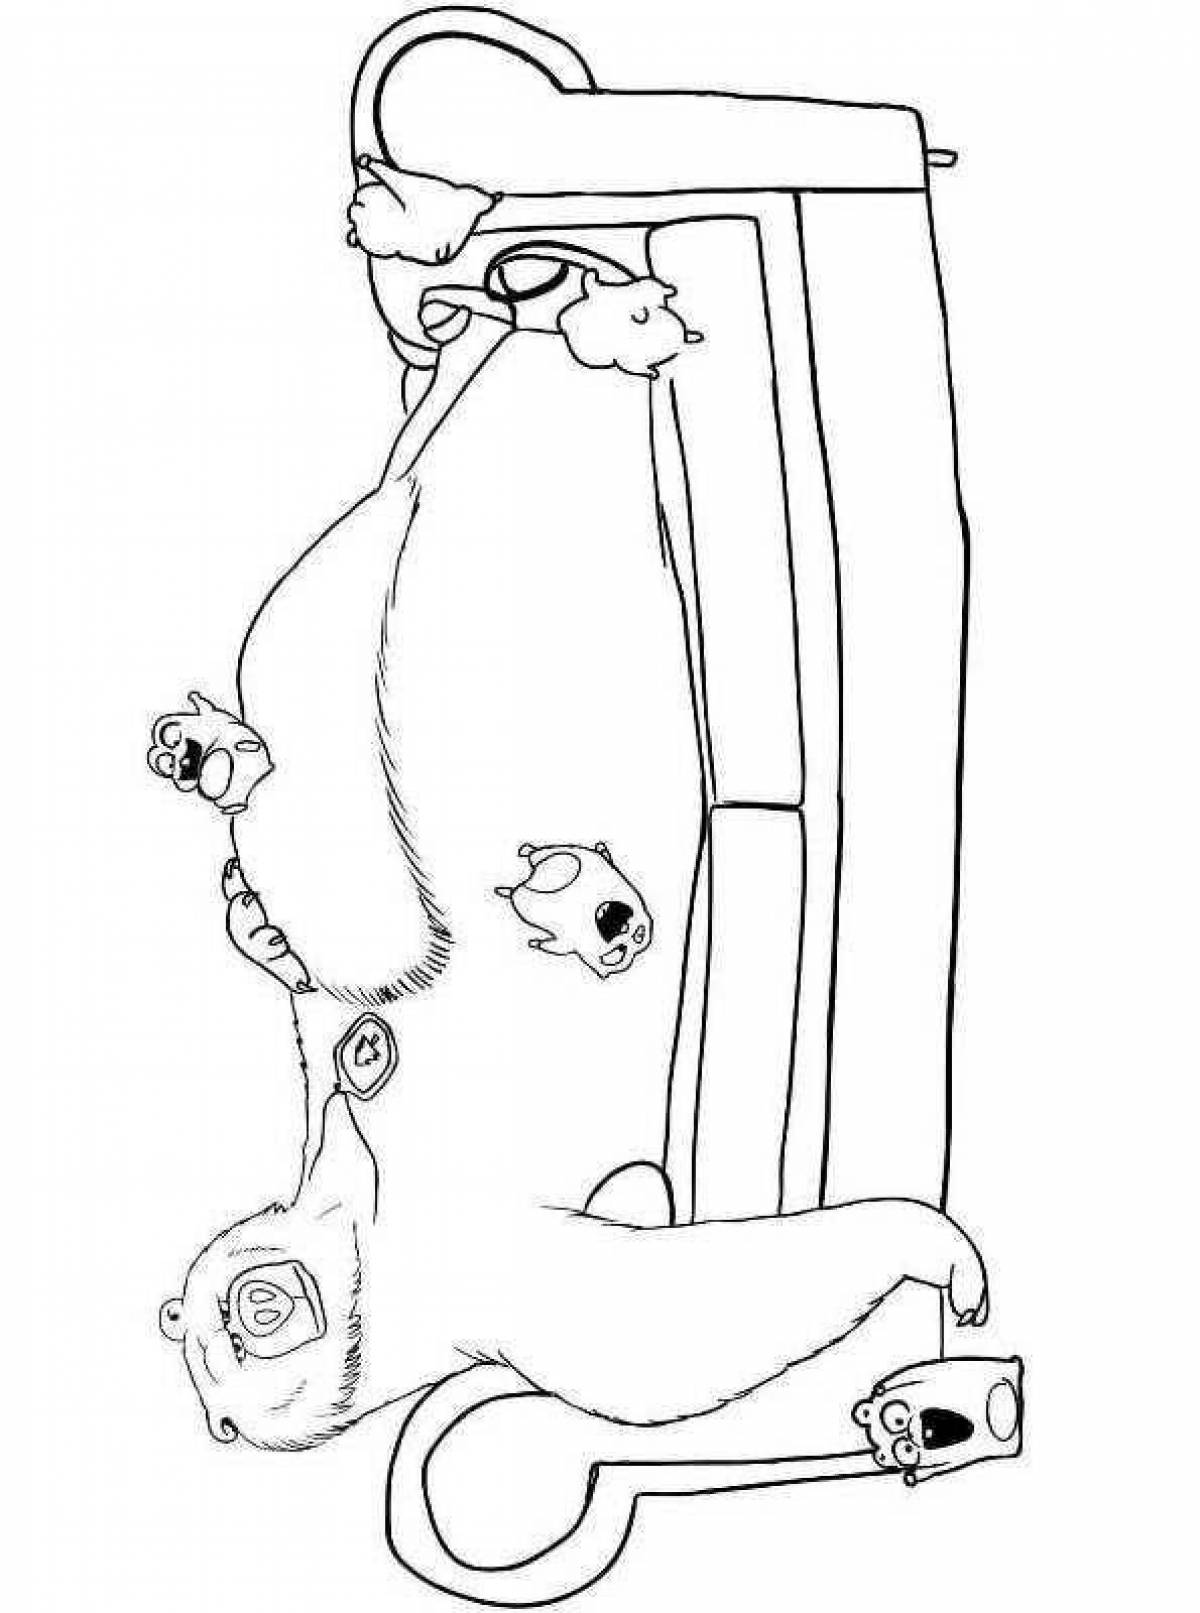 Incredible grizzly and lemming coloring pages